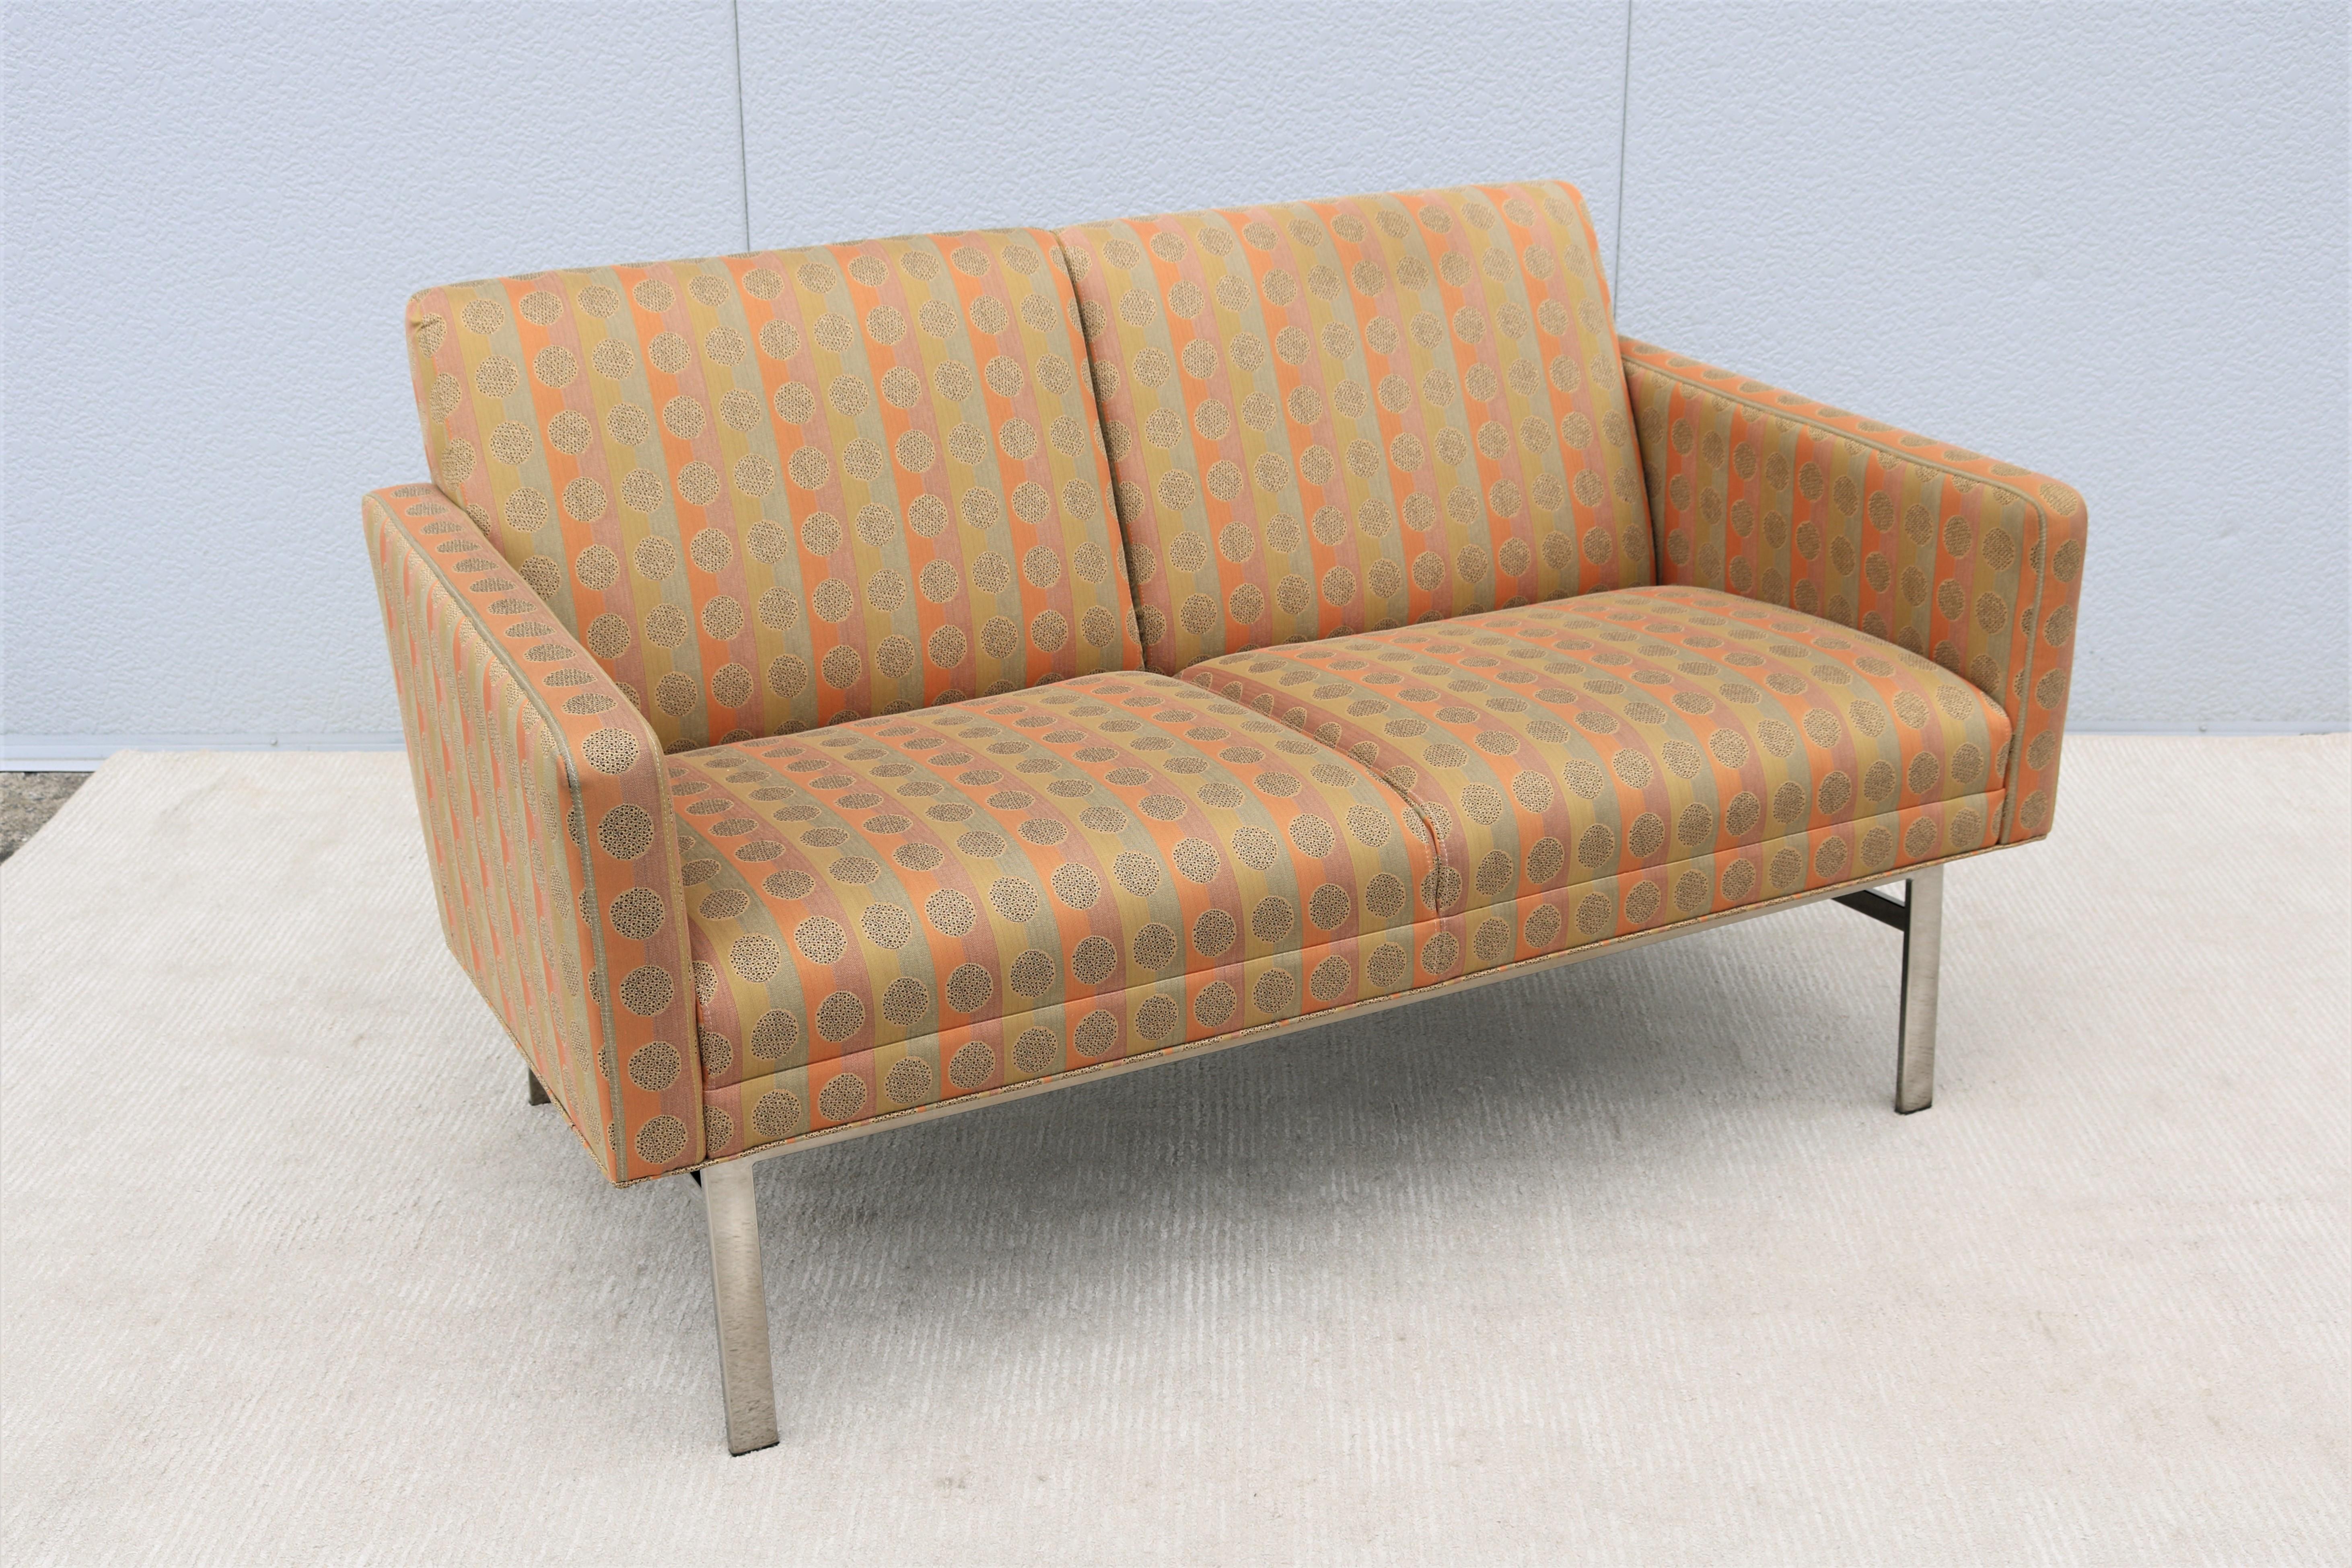 Elegant and high-end quality Kelly settee lounge 2 seat sofa by Jack Cartwright. 
Very comfortable and well designed.
Fits seamlessly into any environment and among midcentury Classic design. 
Appropriate for home and workplace interiors, the